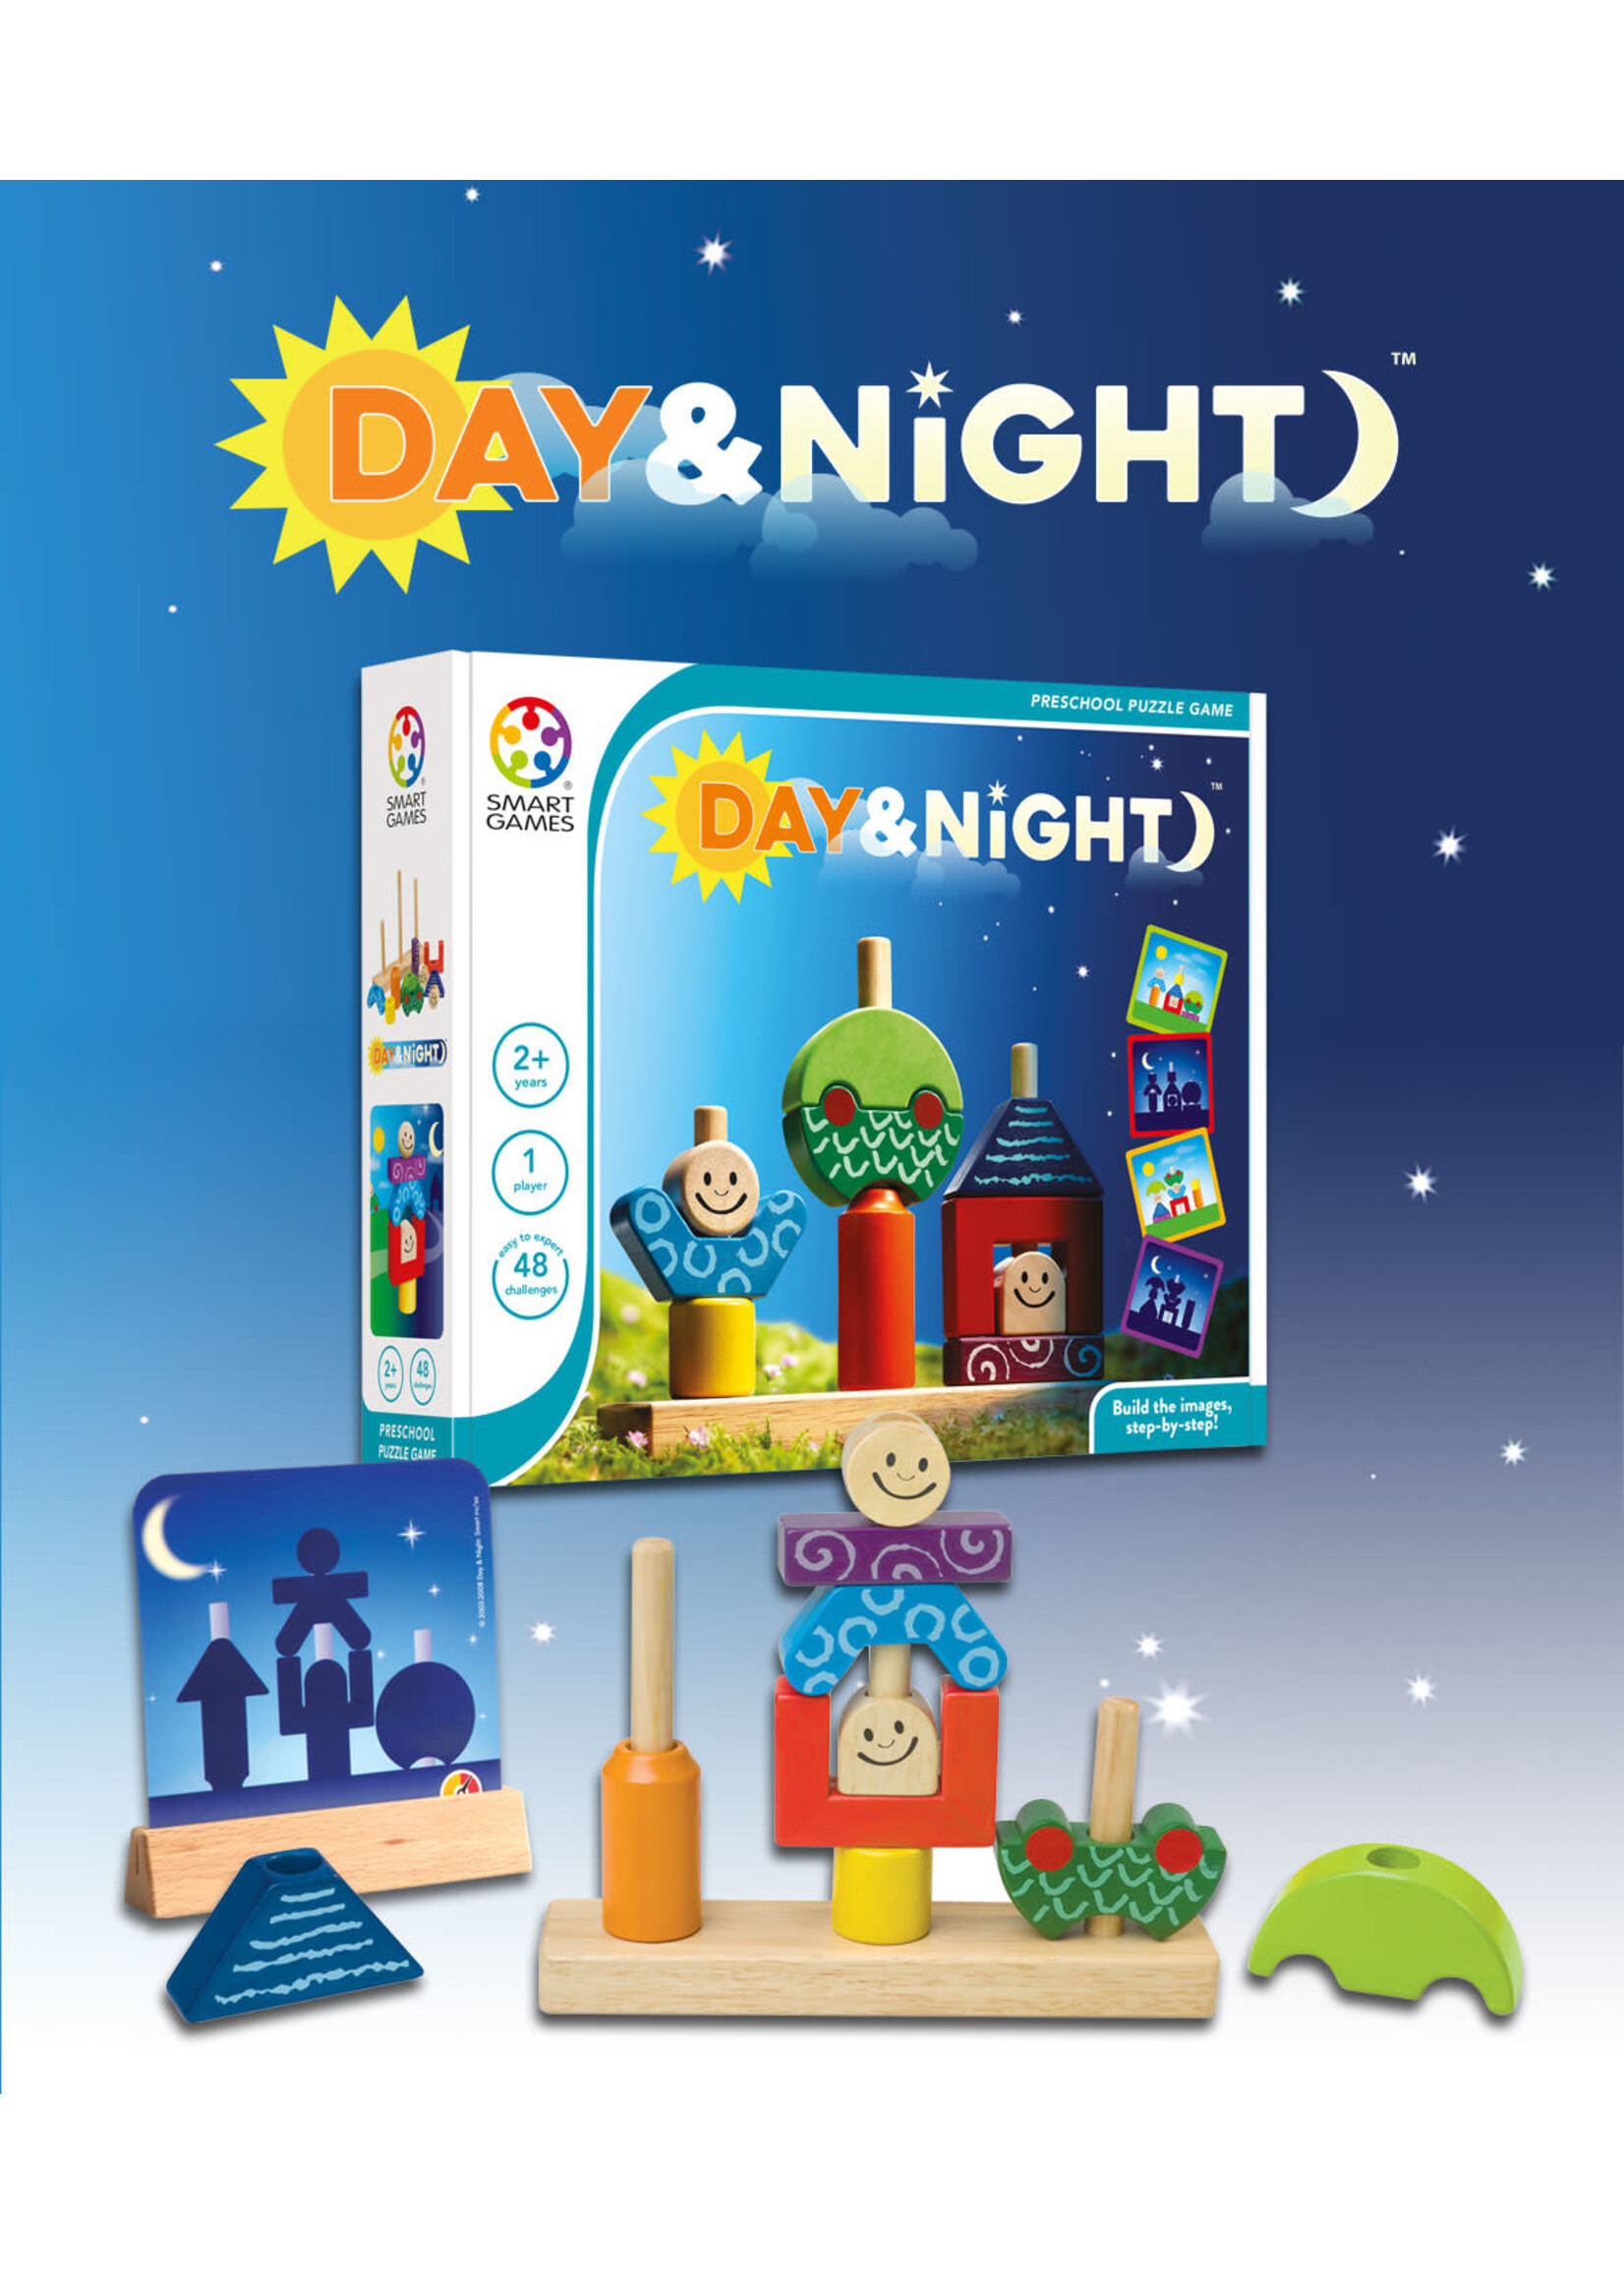 Smart games Smart games - Day & night / Jour & nuit